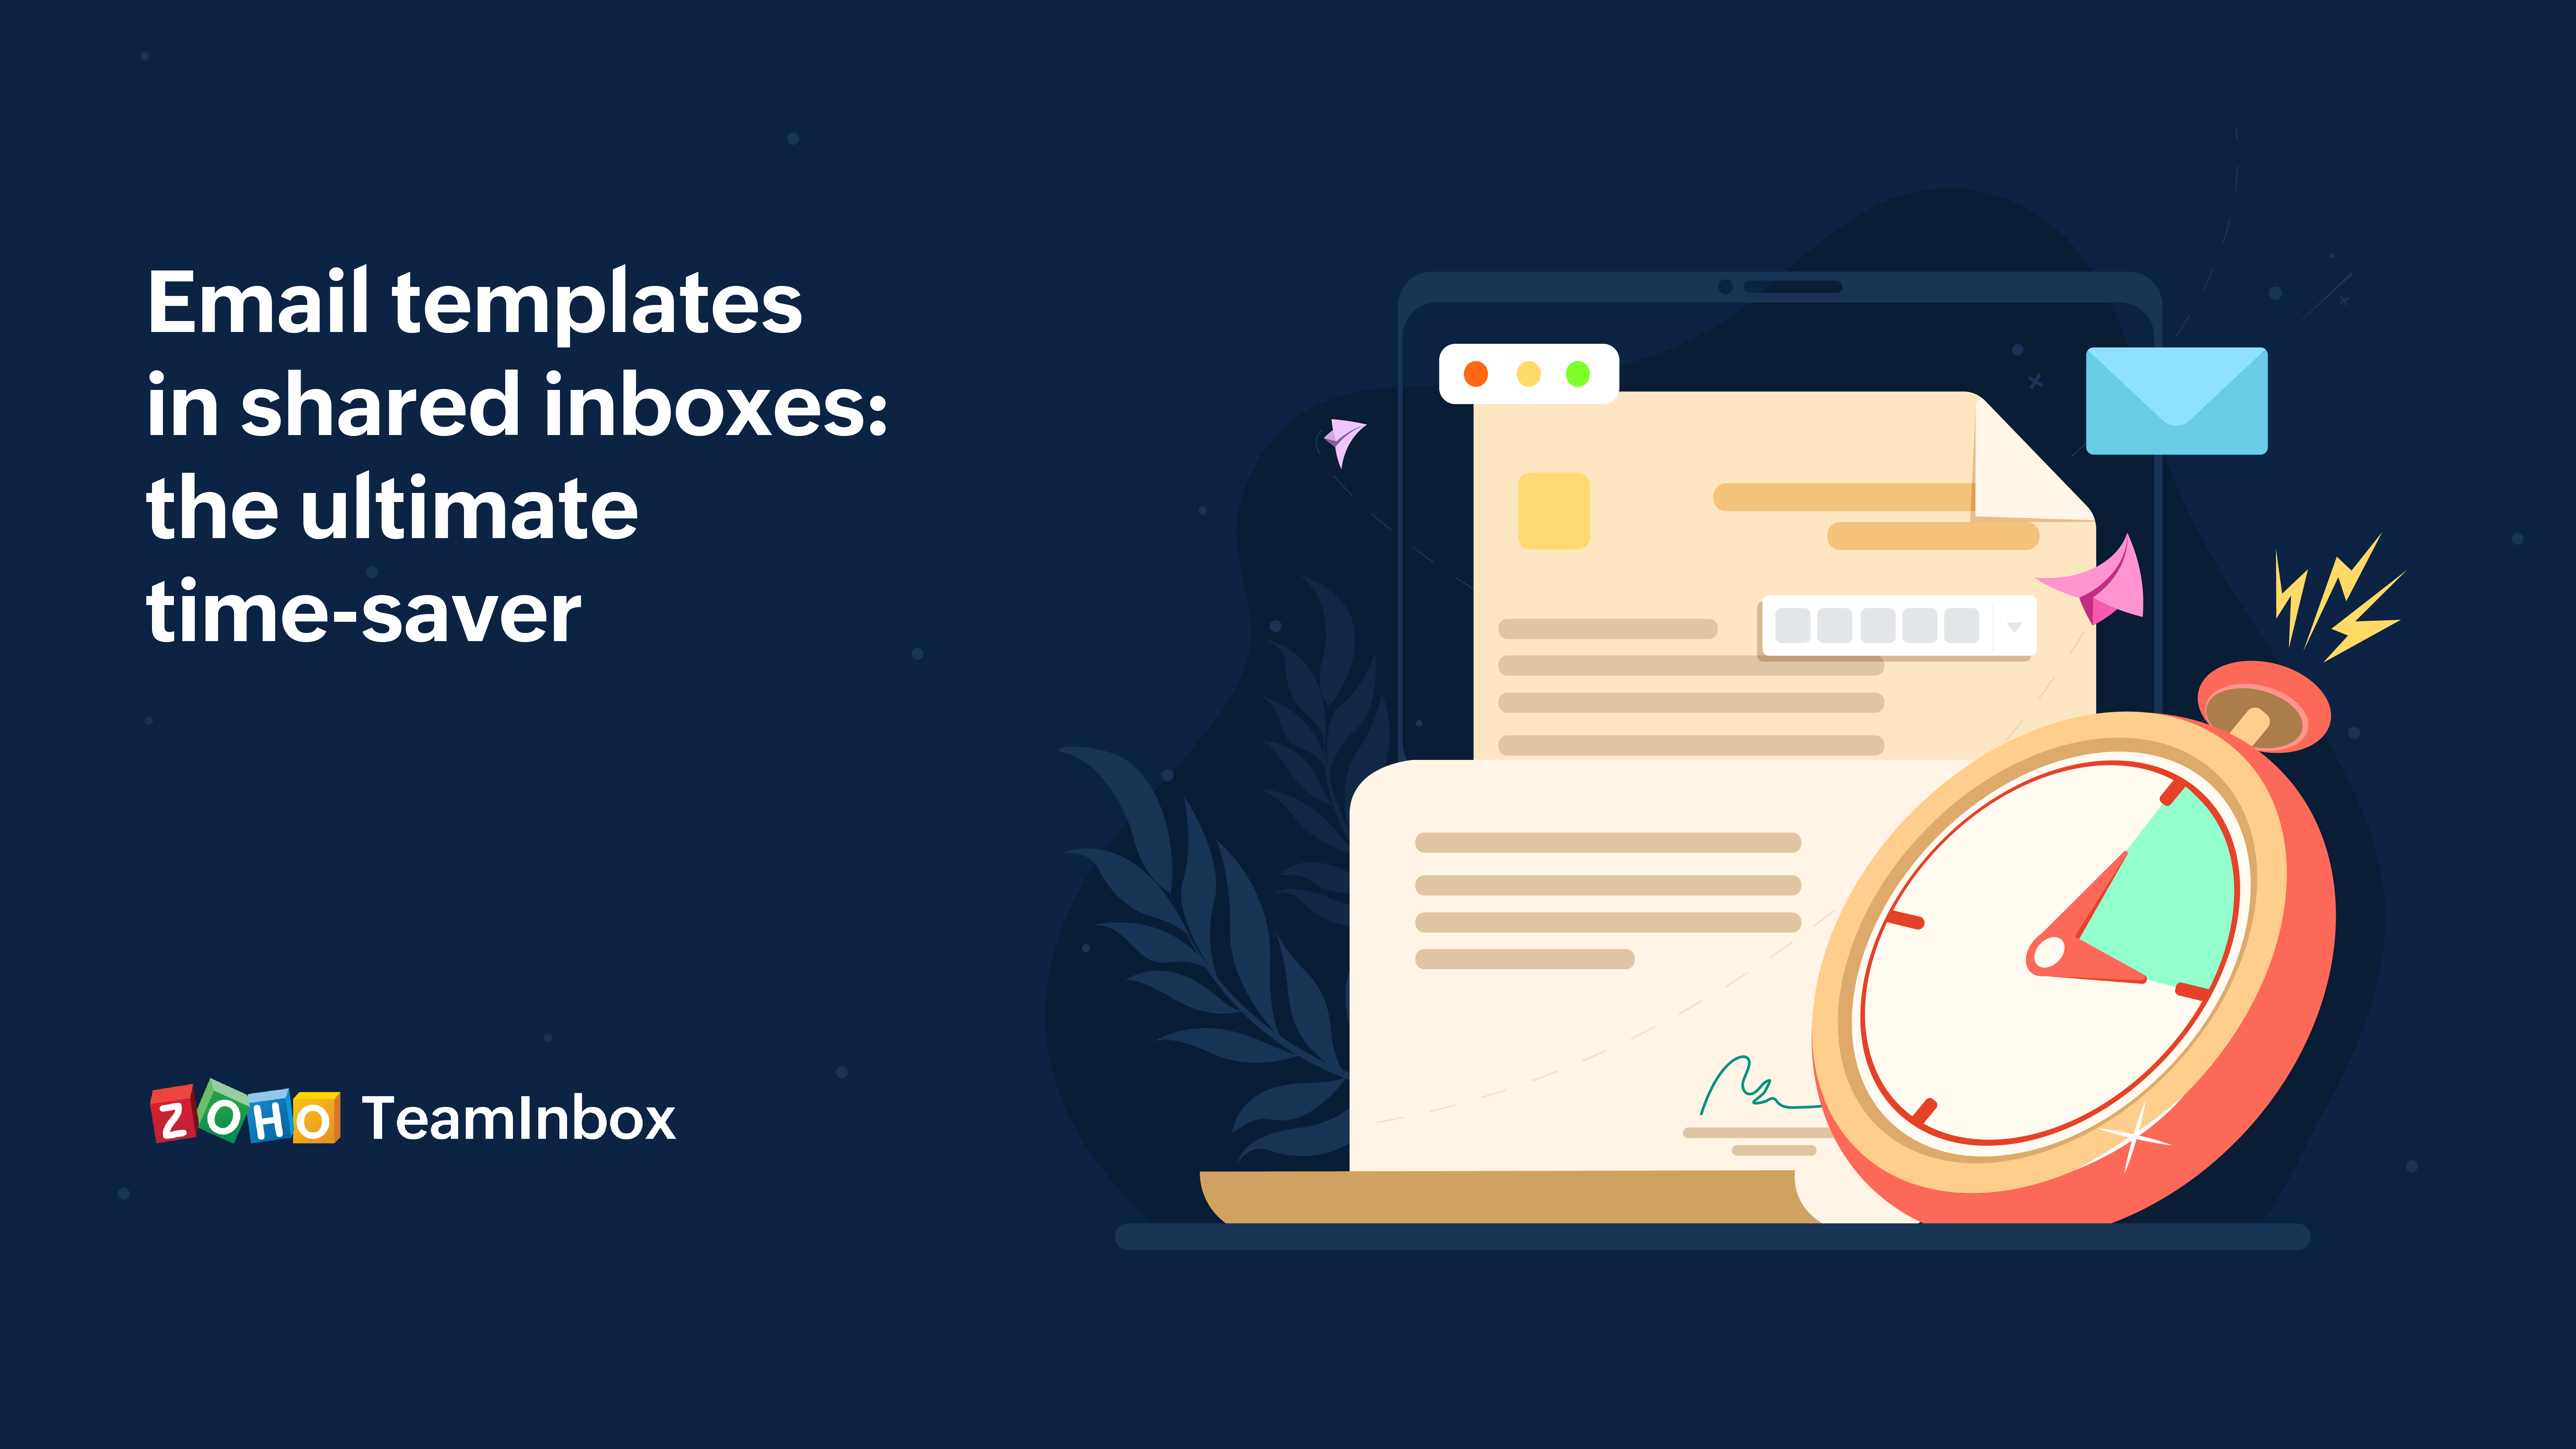 Email templates in shared inboxes: the ultimate time-saver